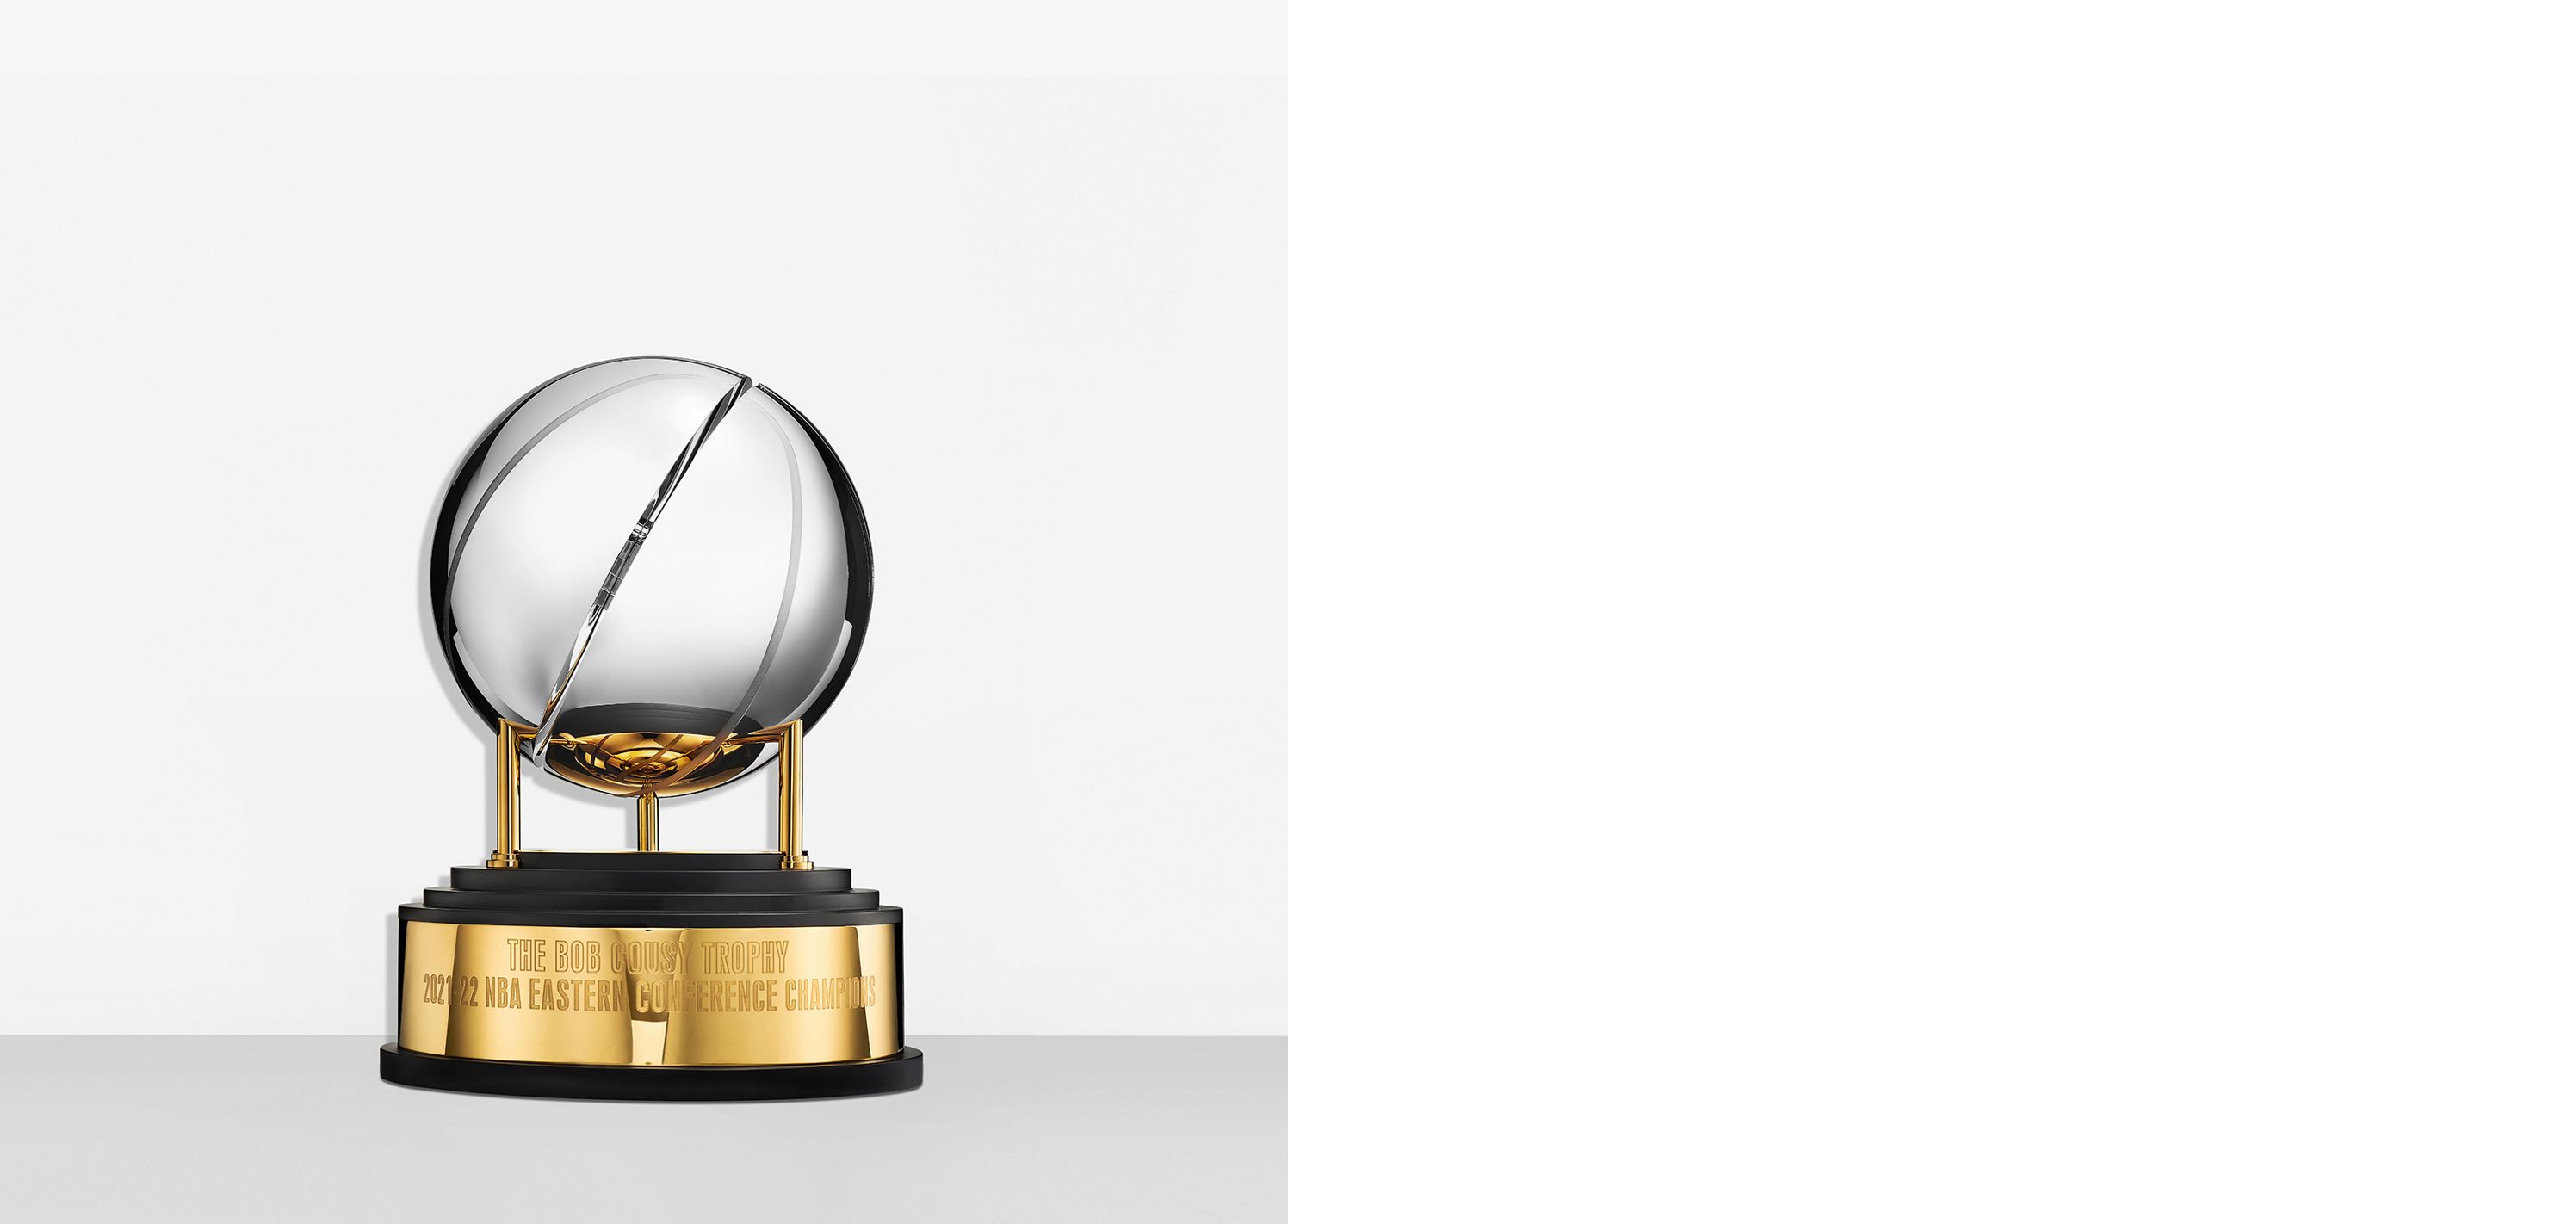 The Larry O' Brien Championship Trophy. Designed and handcrafted by Tiffany  & Co. for the National Basketball Association®. - Tiffany